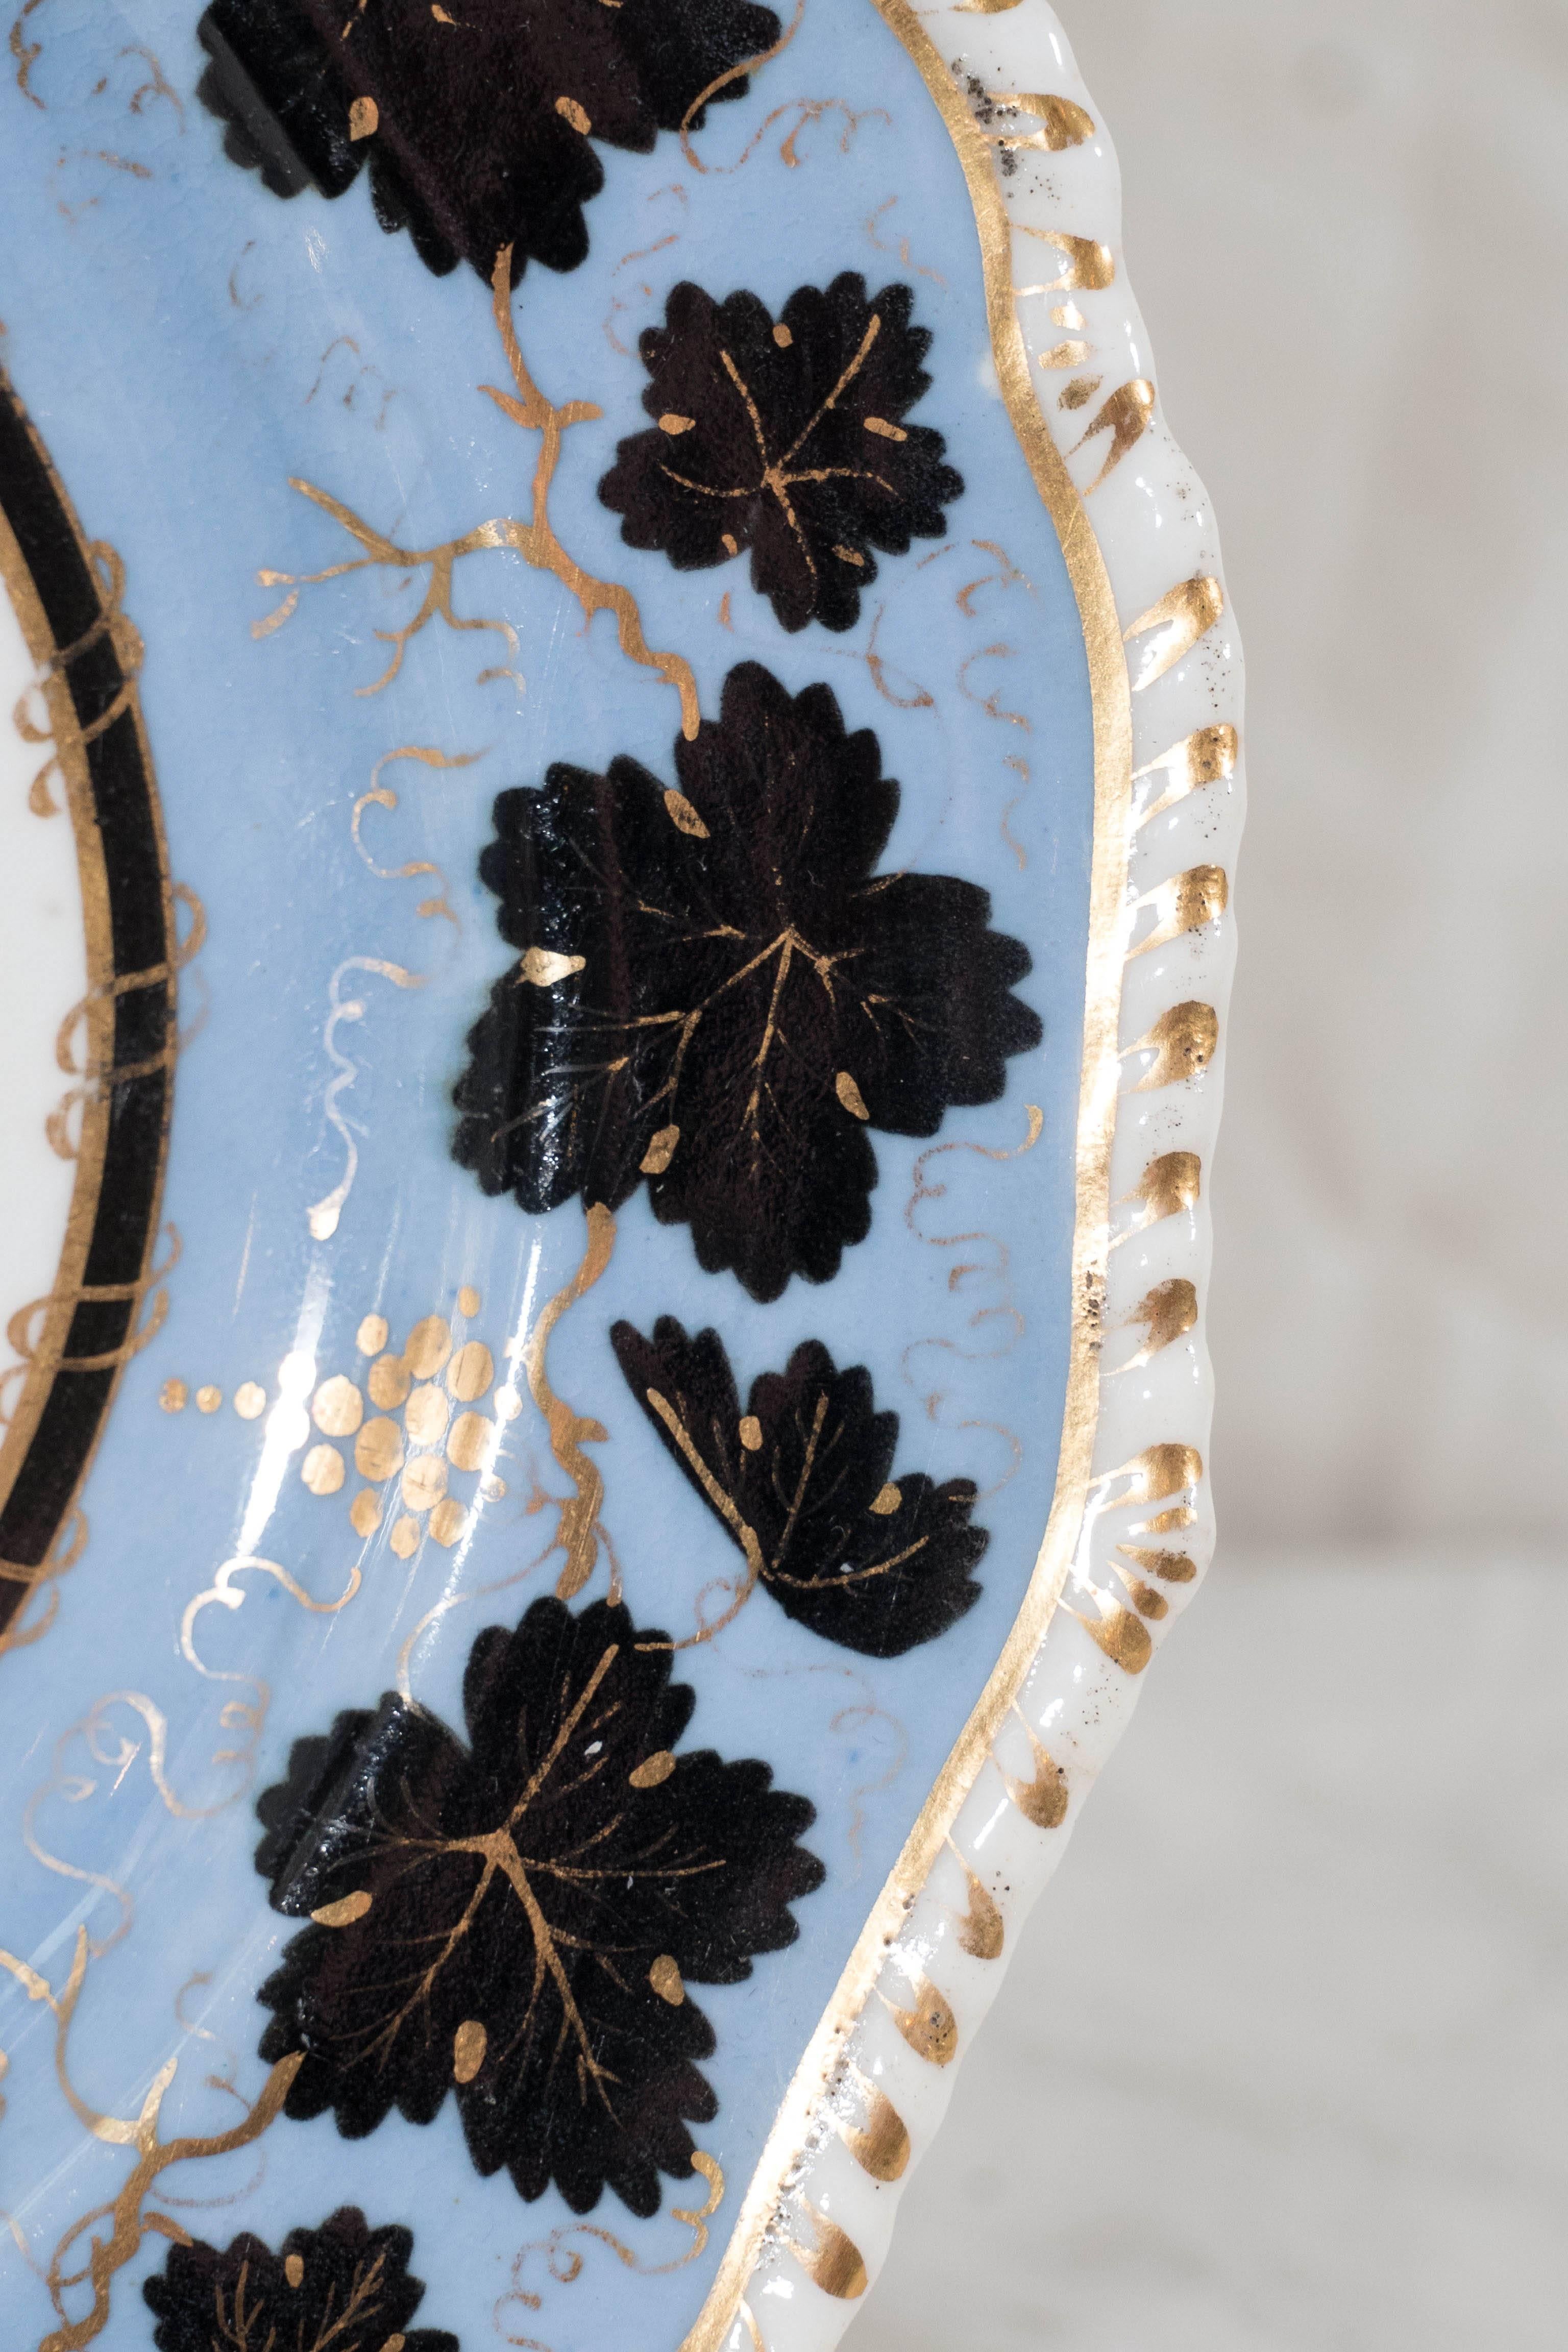 Antique Porcelain Light Blue Dishes Painted with Black Leaves (13 pieces NOT 15) im Zustand „Hervorragend“ in Katonah, NY